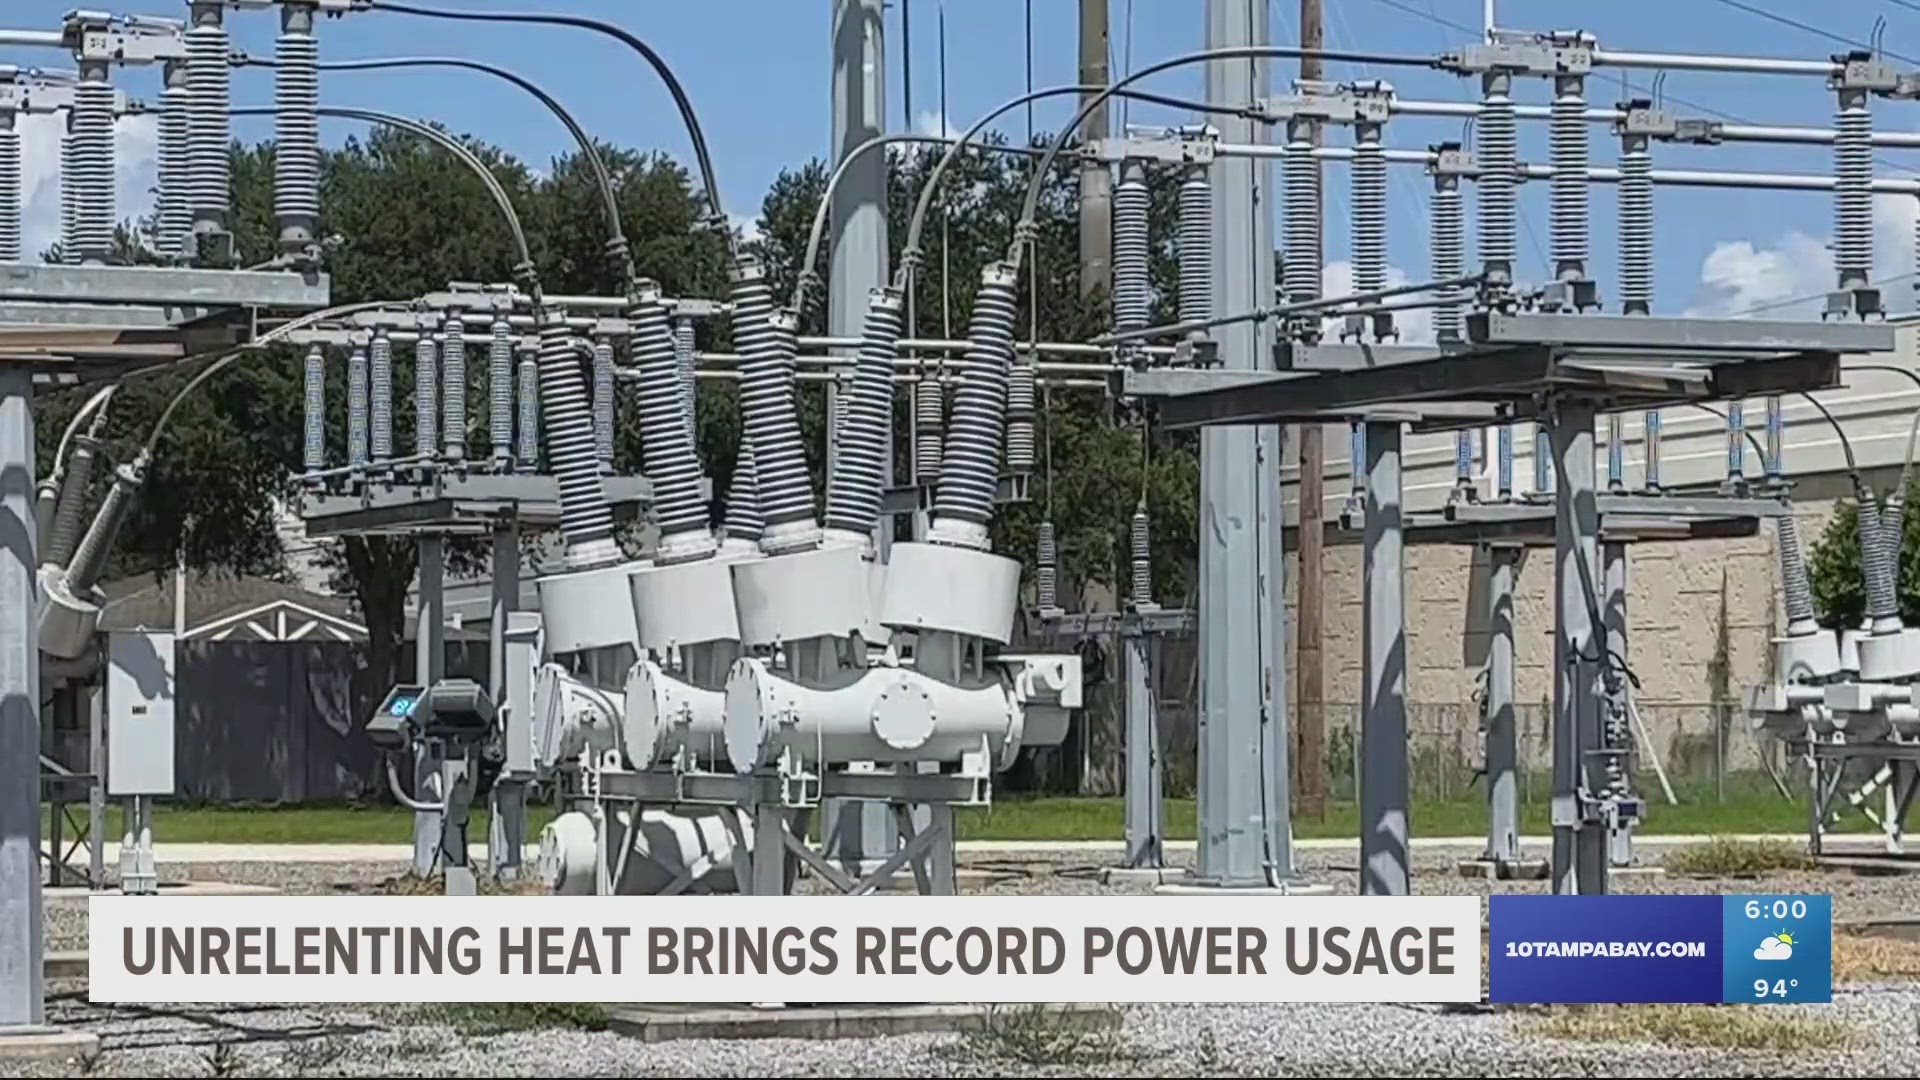 So far, a major Tampa Bay-area utility says the power grid is handling demand.